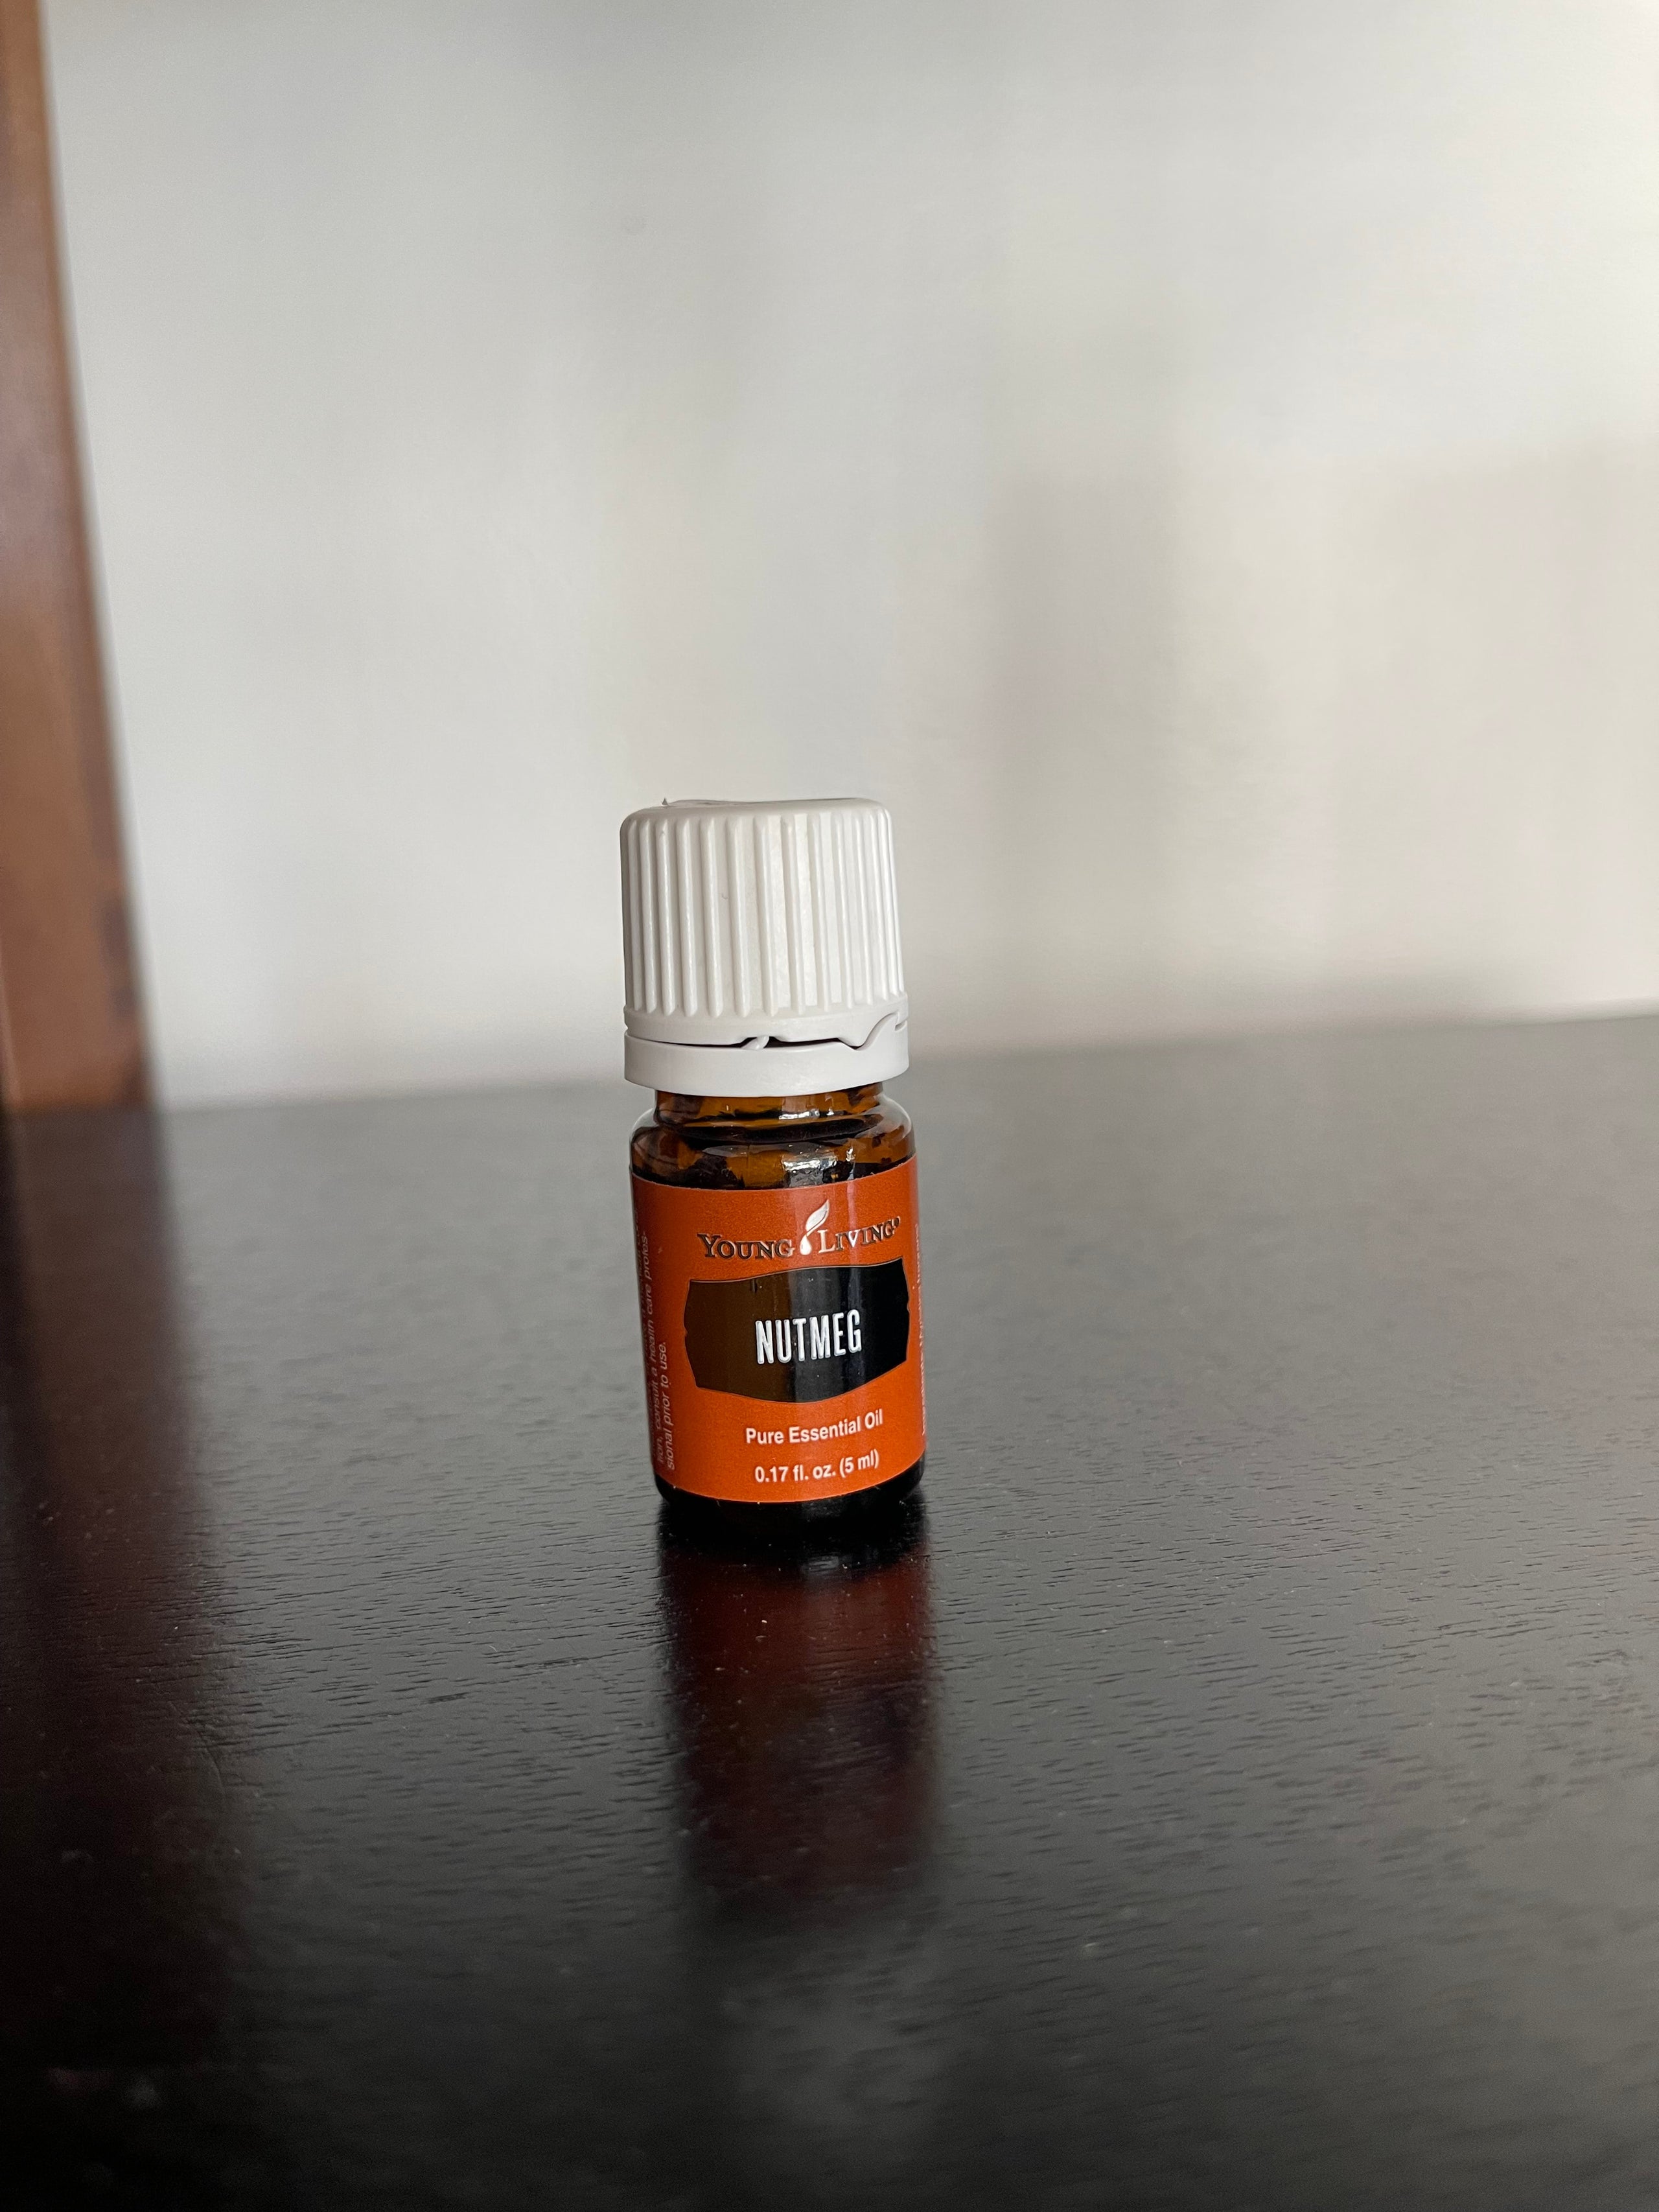 Young Living Nutmeg Essential Oil 5ml *NEW*